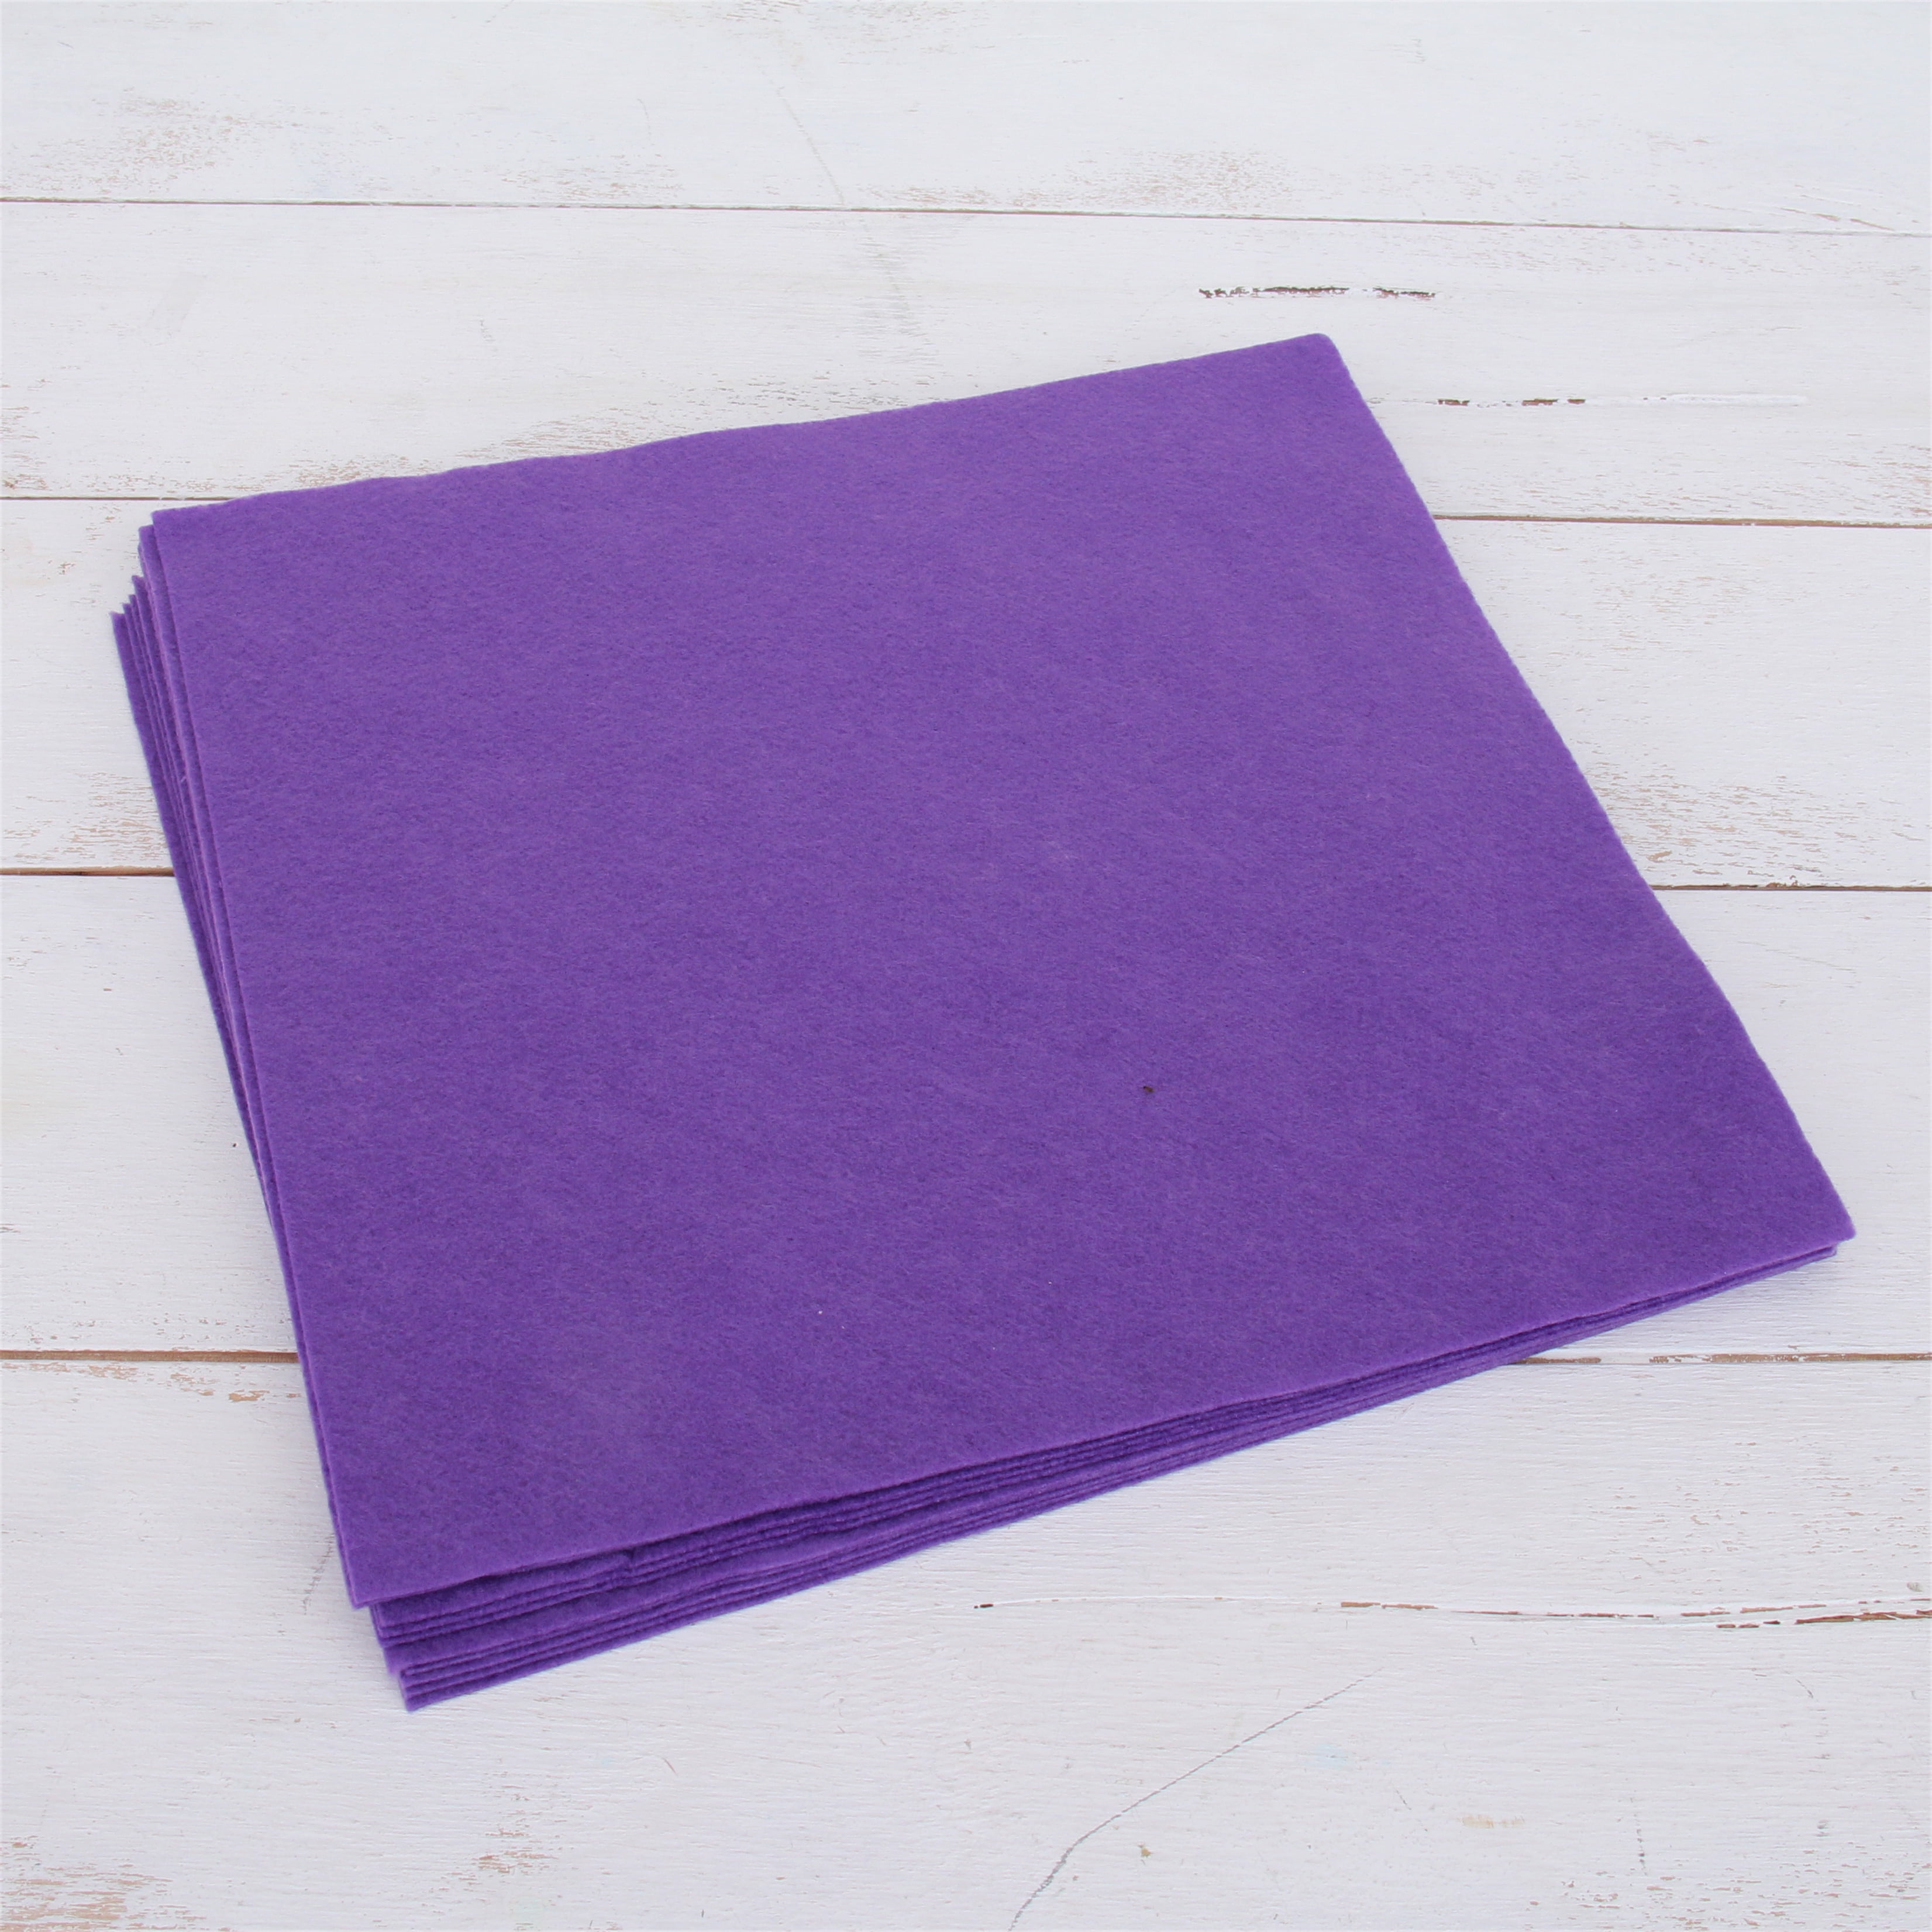 Threadart Premium Felt Sheets - 10 Sheets - 12 x 12 - Purple | Soft  Wool-Like Feel | 1.2mm Thick for DIY Crafts, Sewing, Crafting Projects 